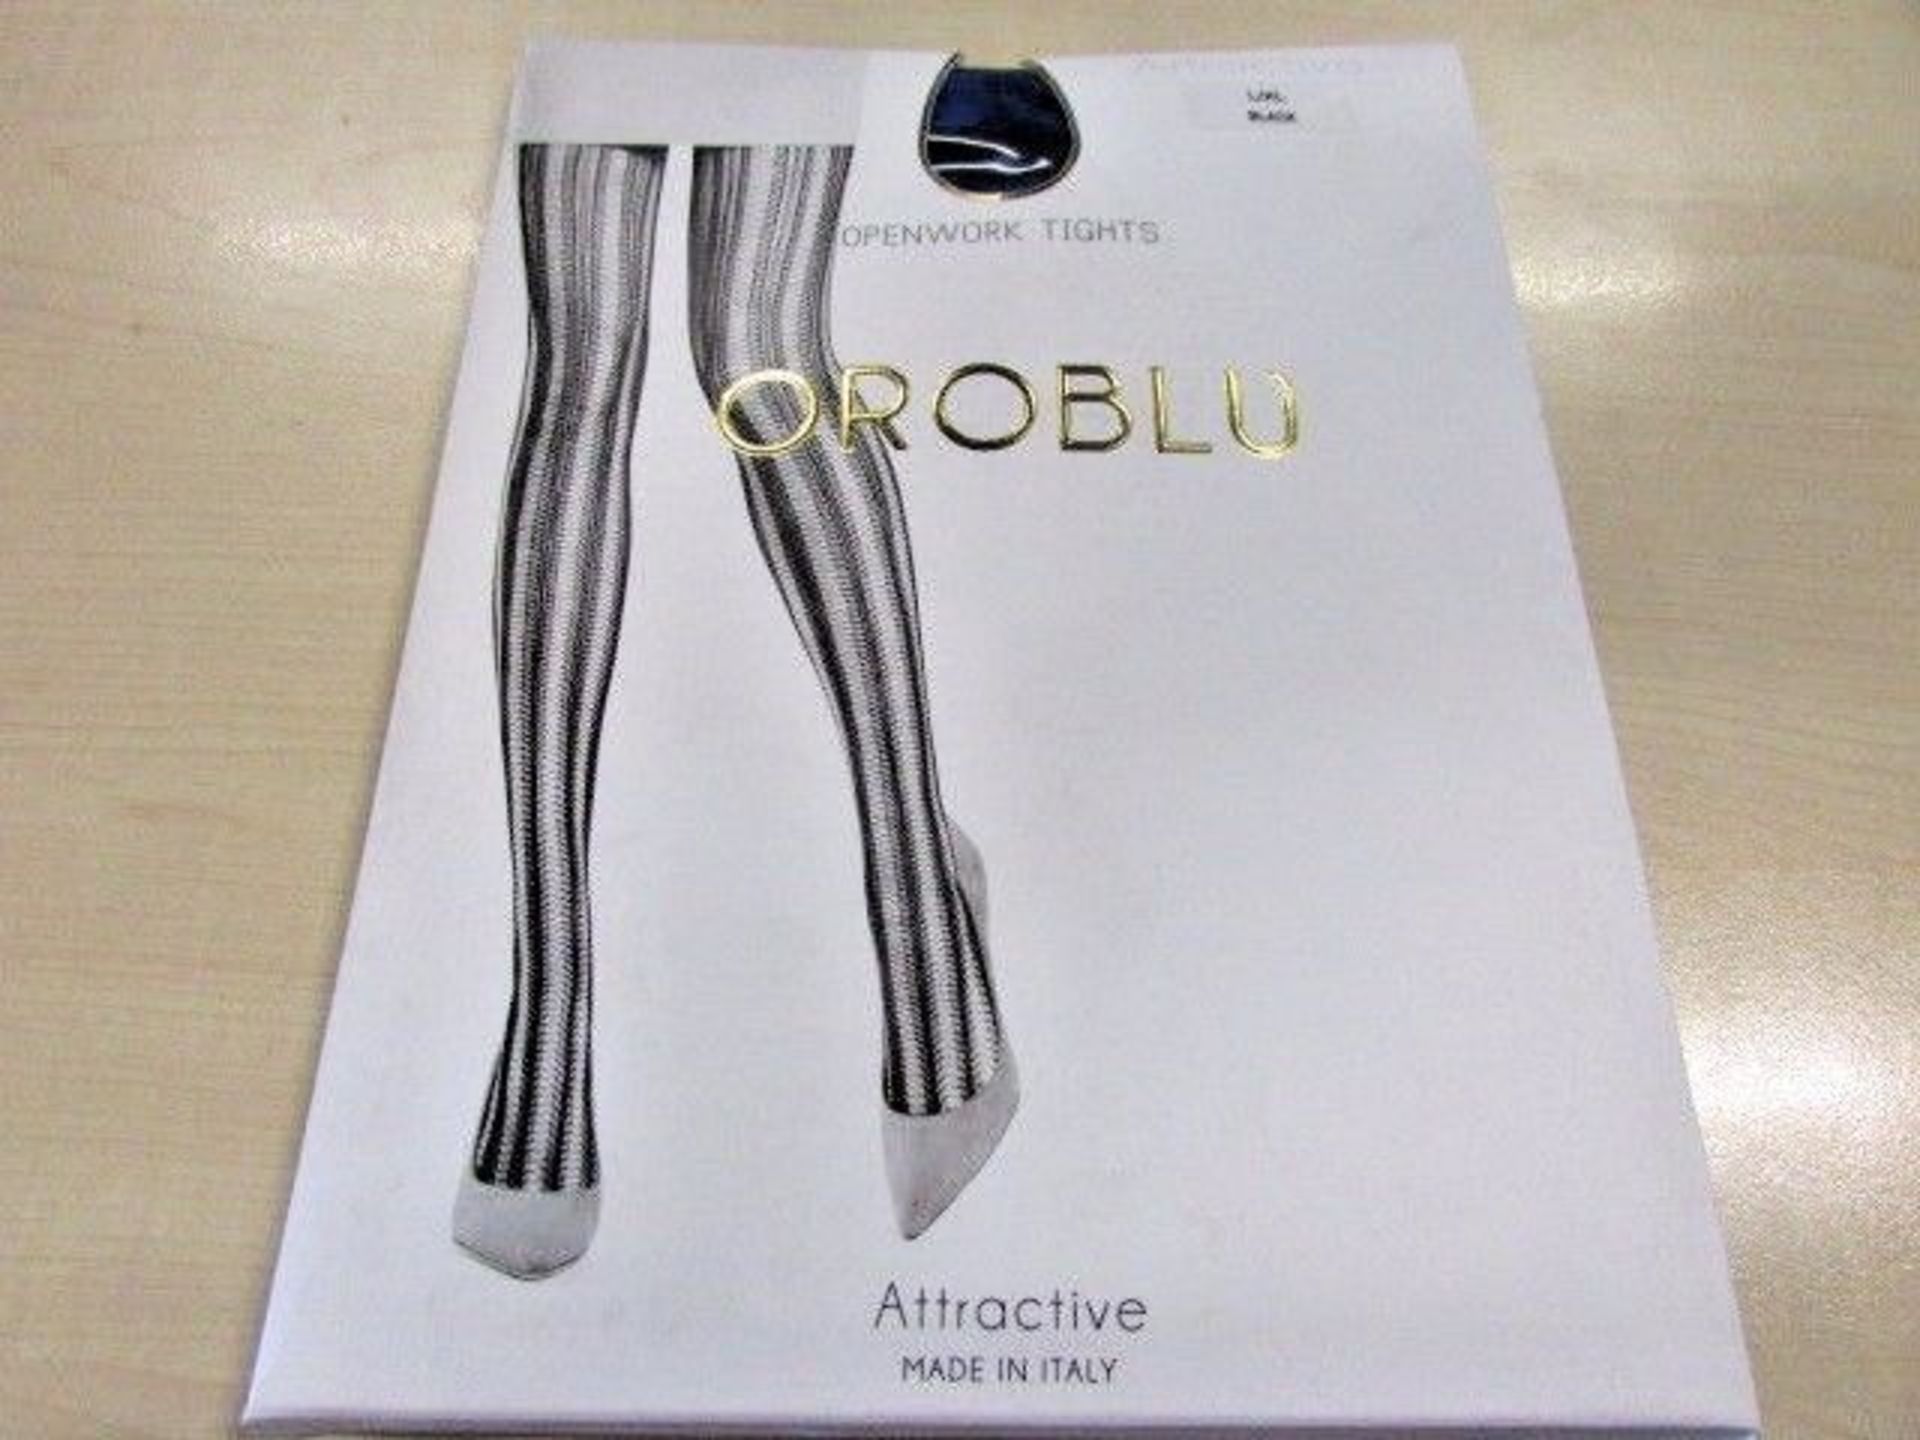 OROBLU 'Collant Attractive' Openwork Tights, Black (Size: Large/X-Large) (New with tags) [Ref: - Image 2 of 3